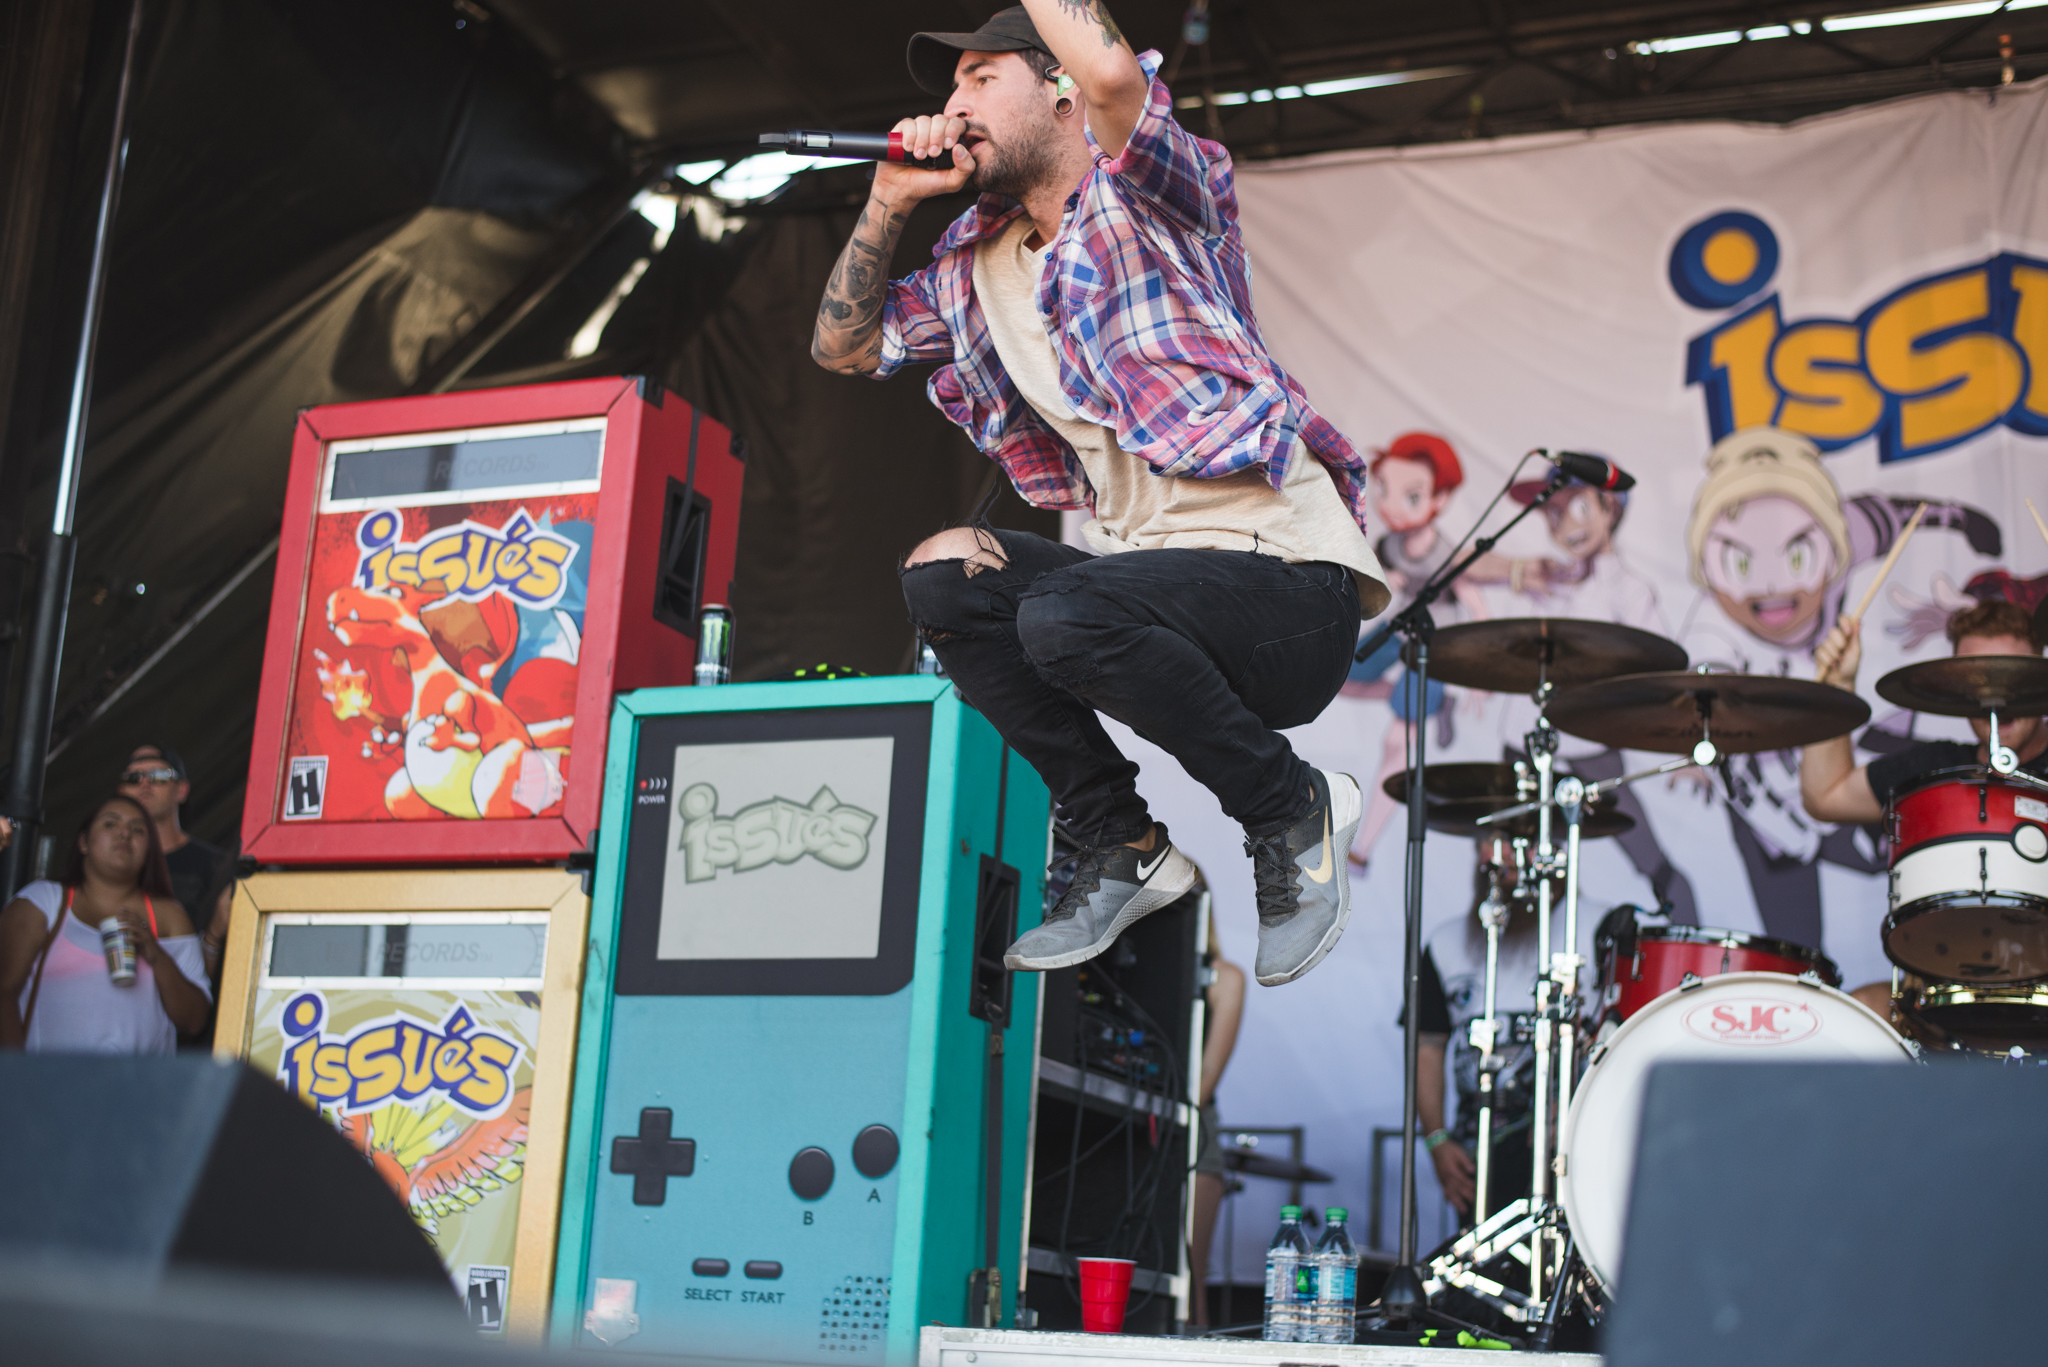 Issues - Photo by Lindsey Blane